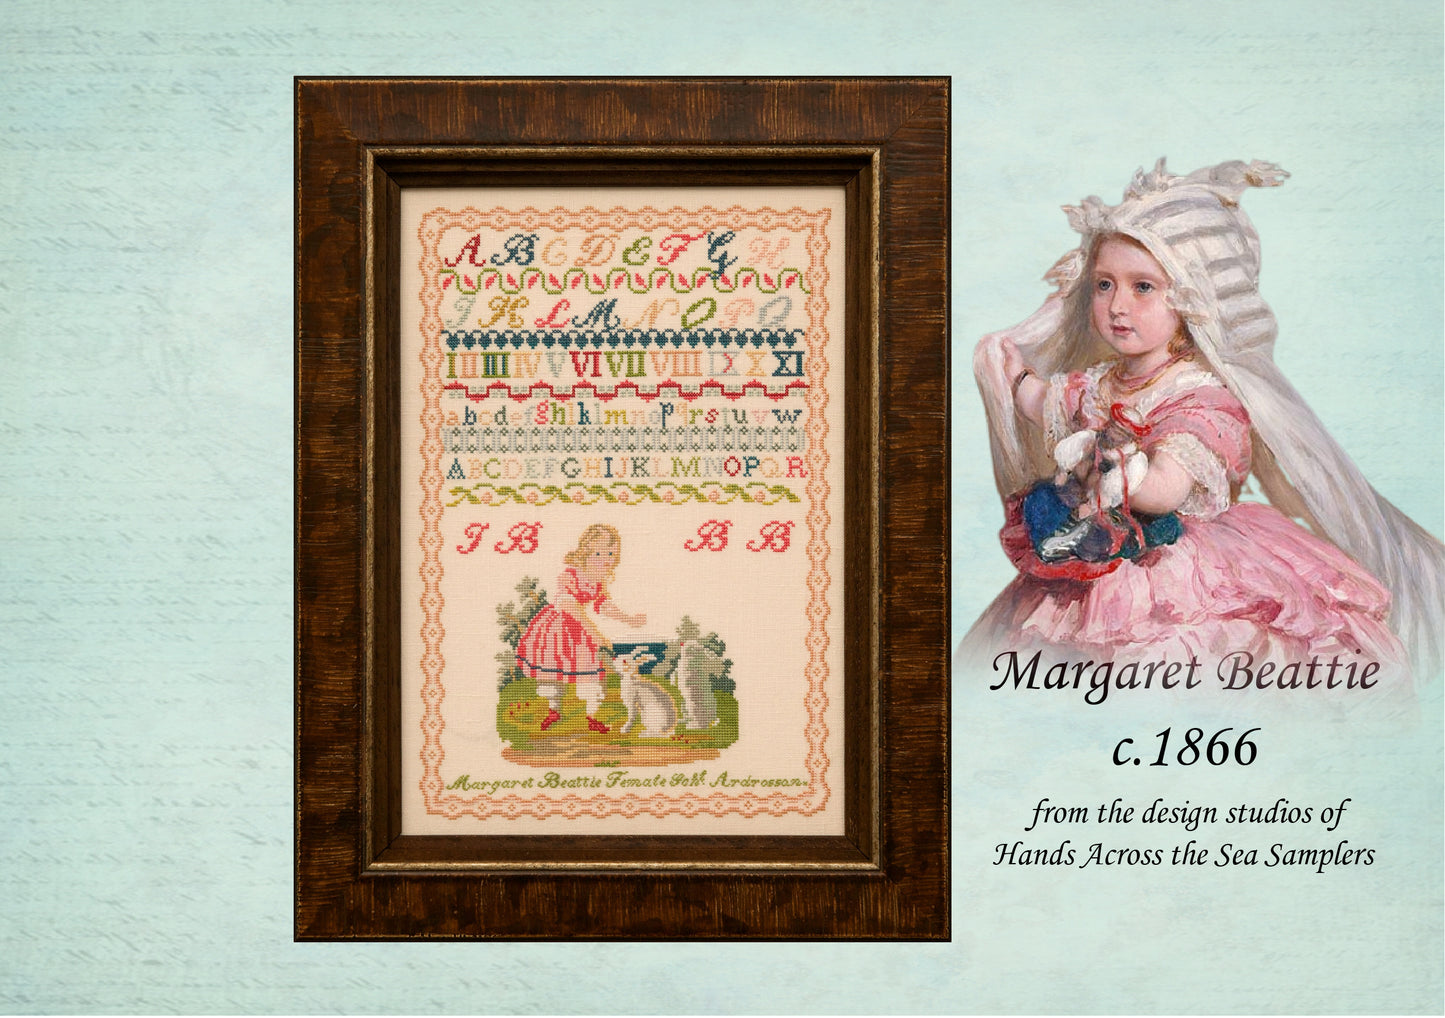 Margaret Beattie 1866 - Reproduction Sampler Pattern by Hands Across the Sea Samplers